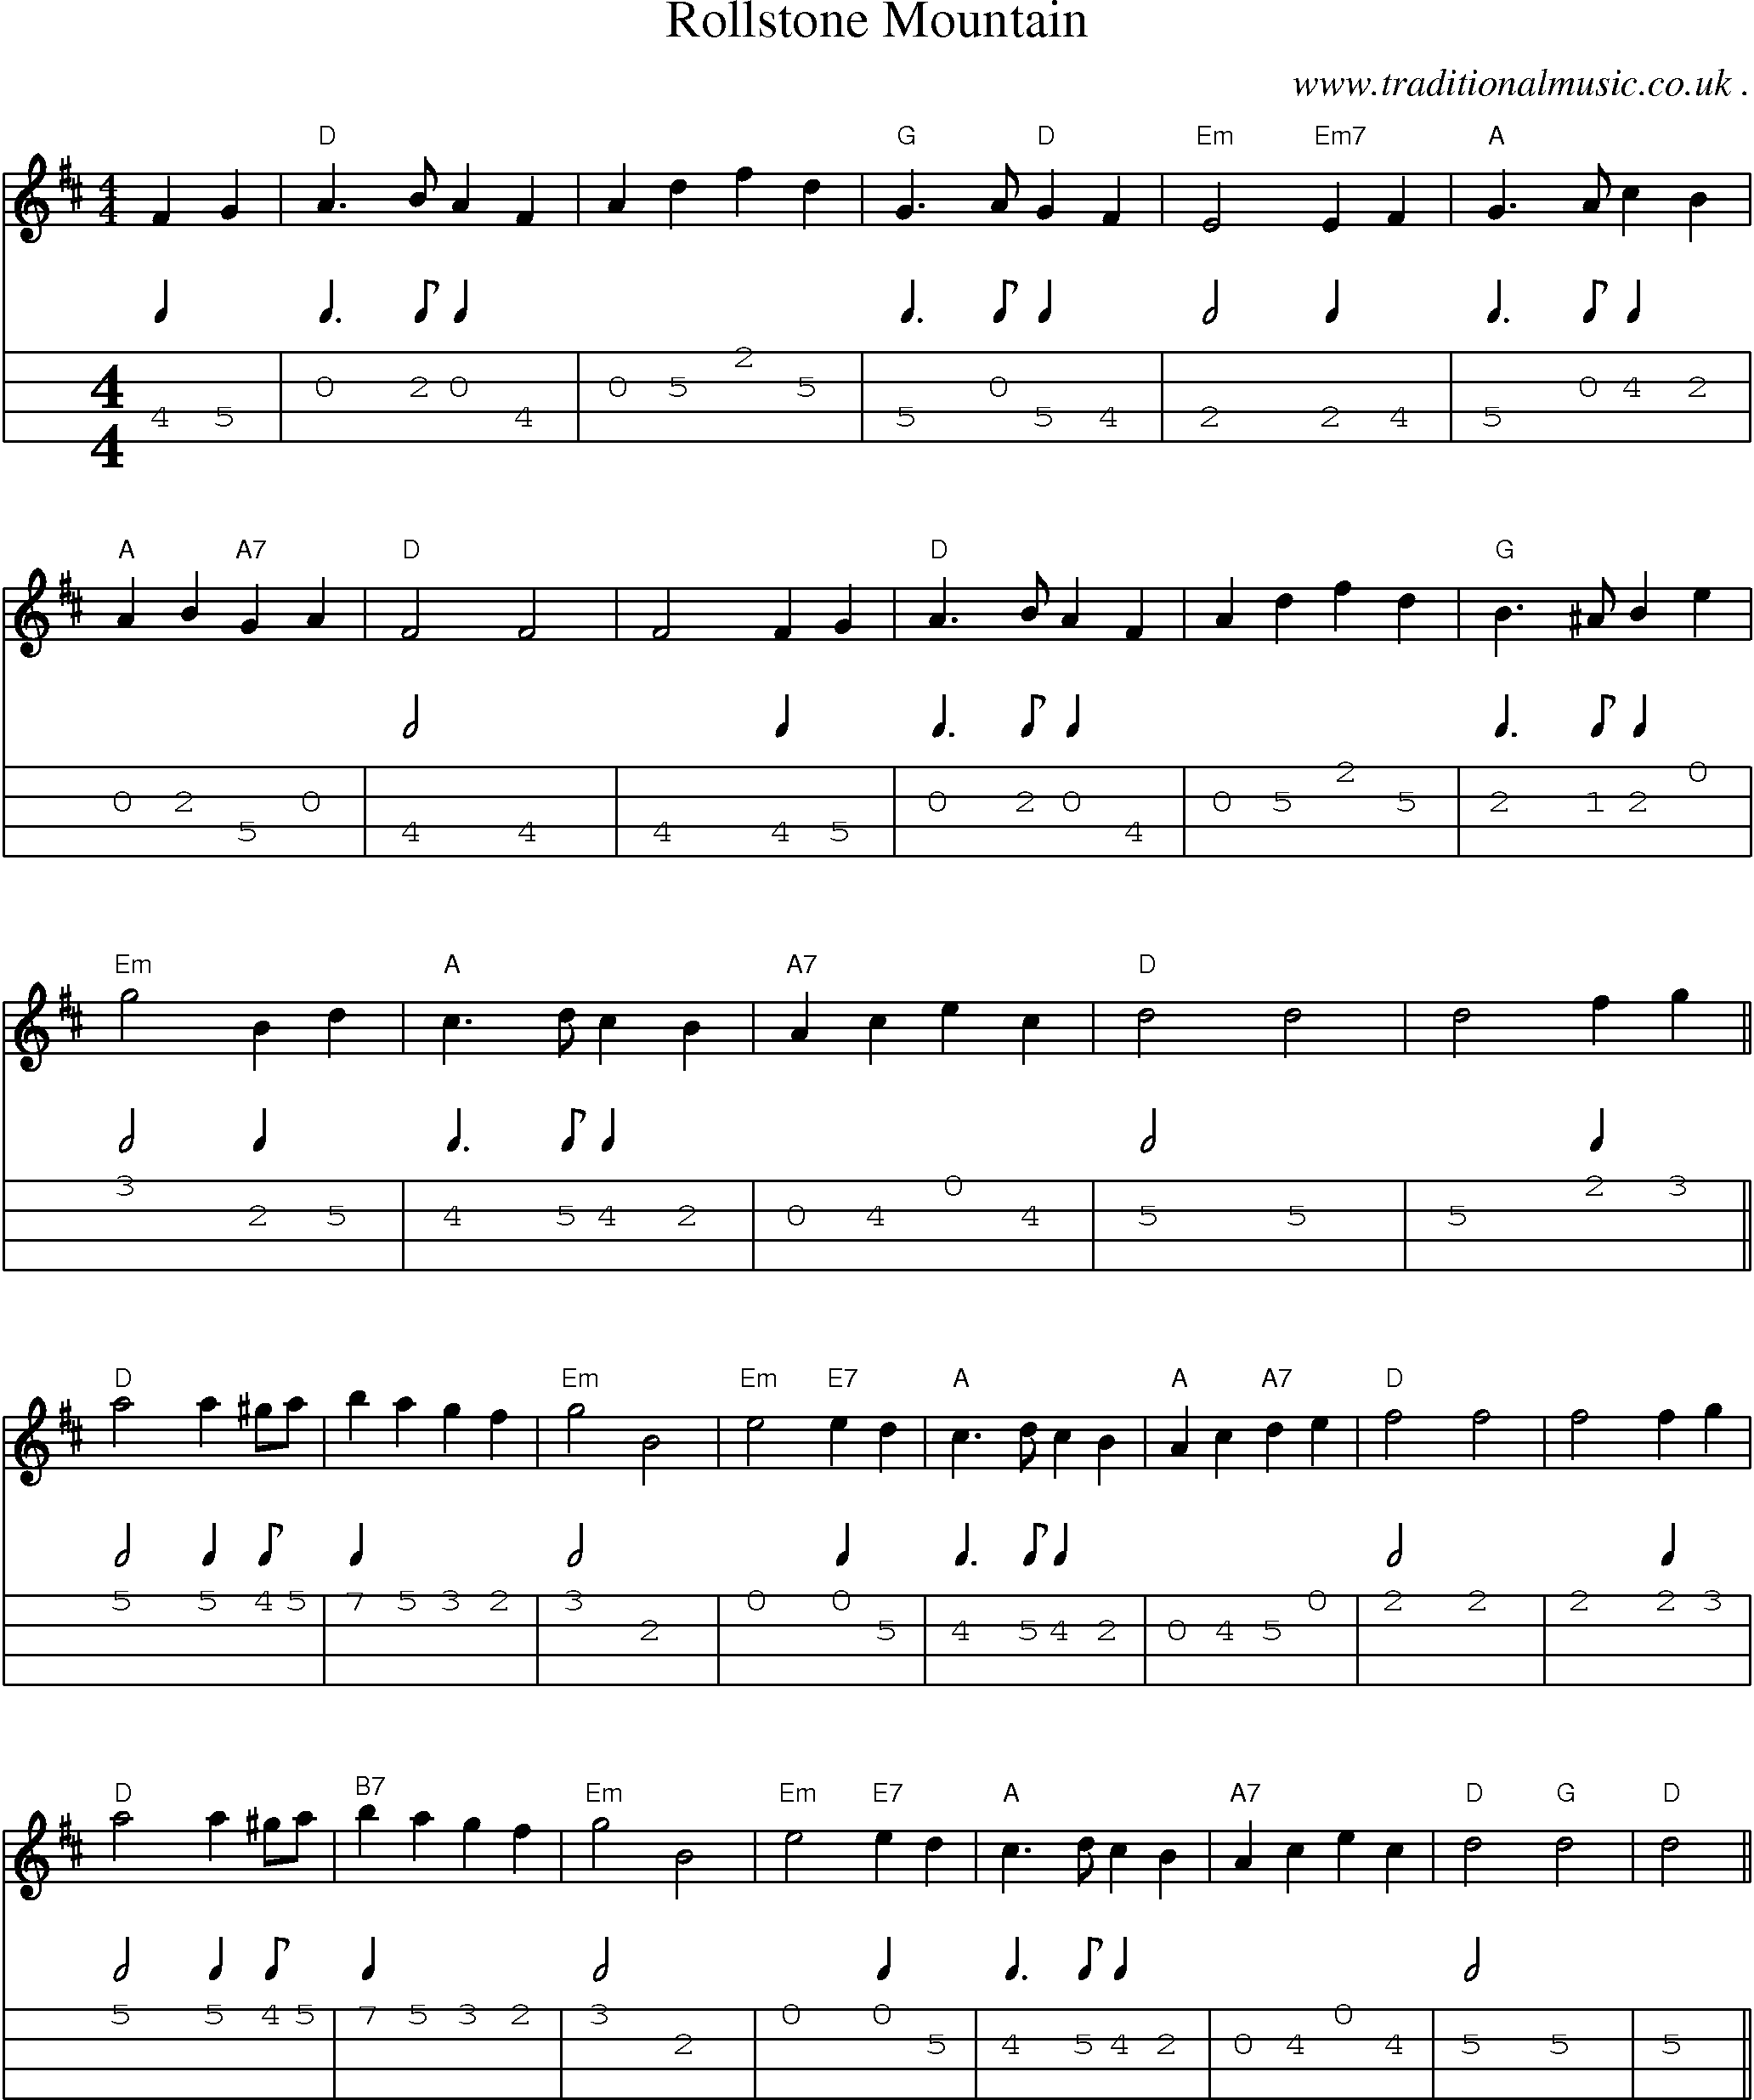 Sheet-Music and Mandolin Tabs for Rollstone Mountain